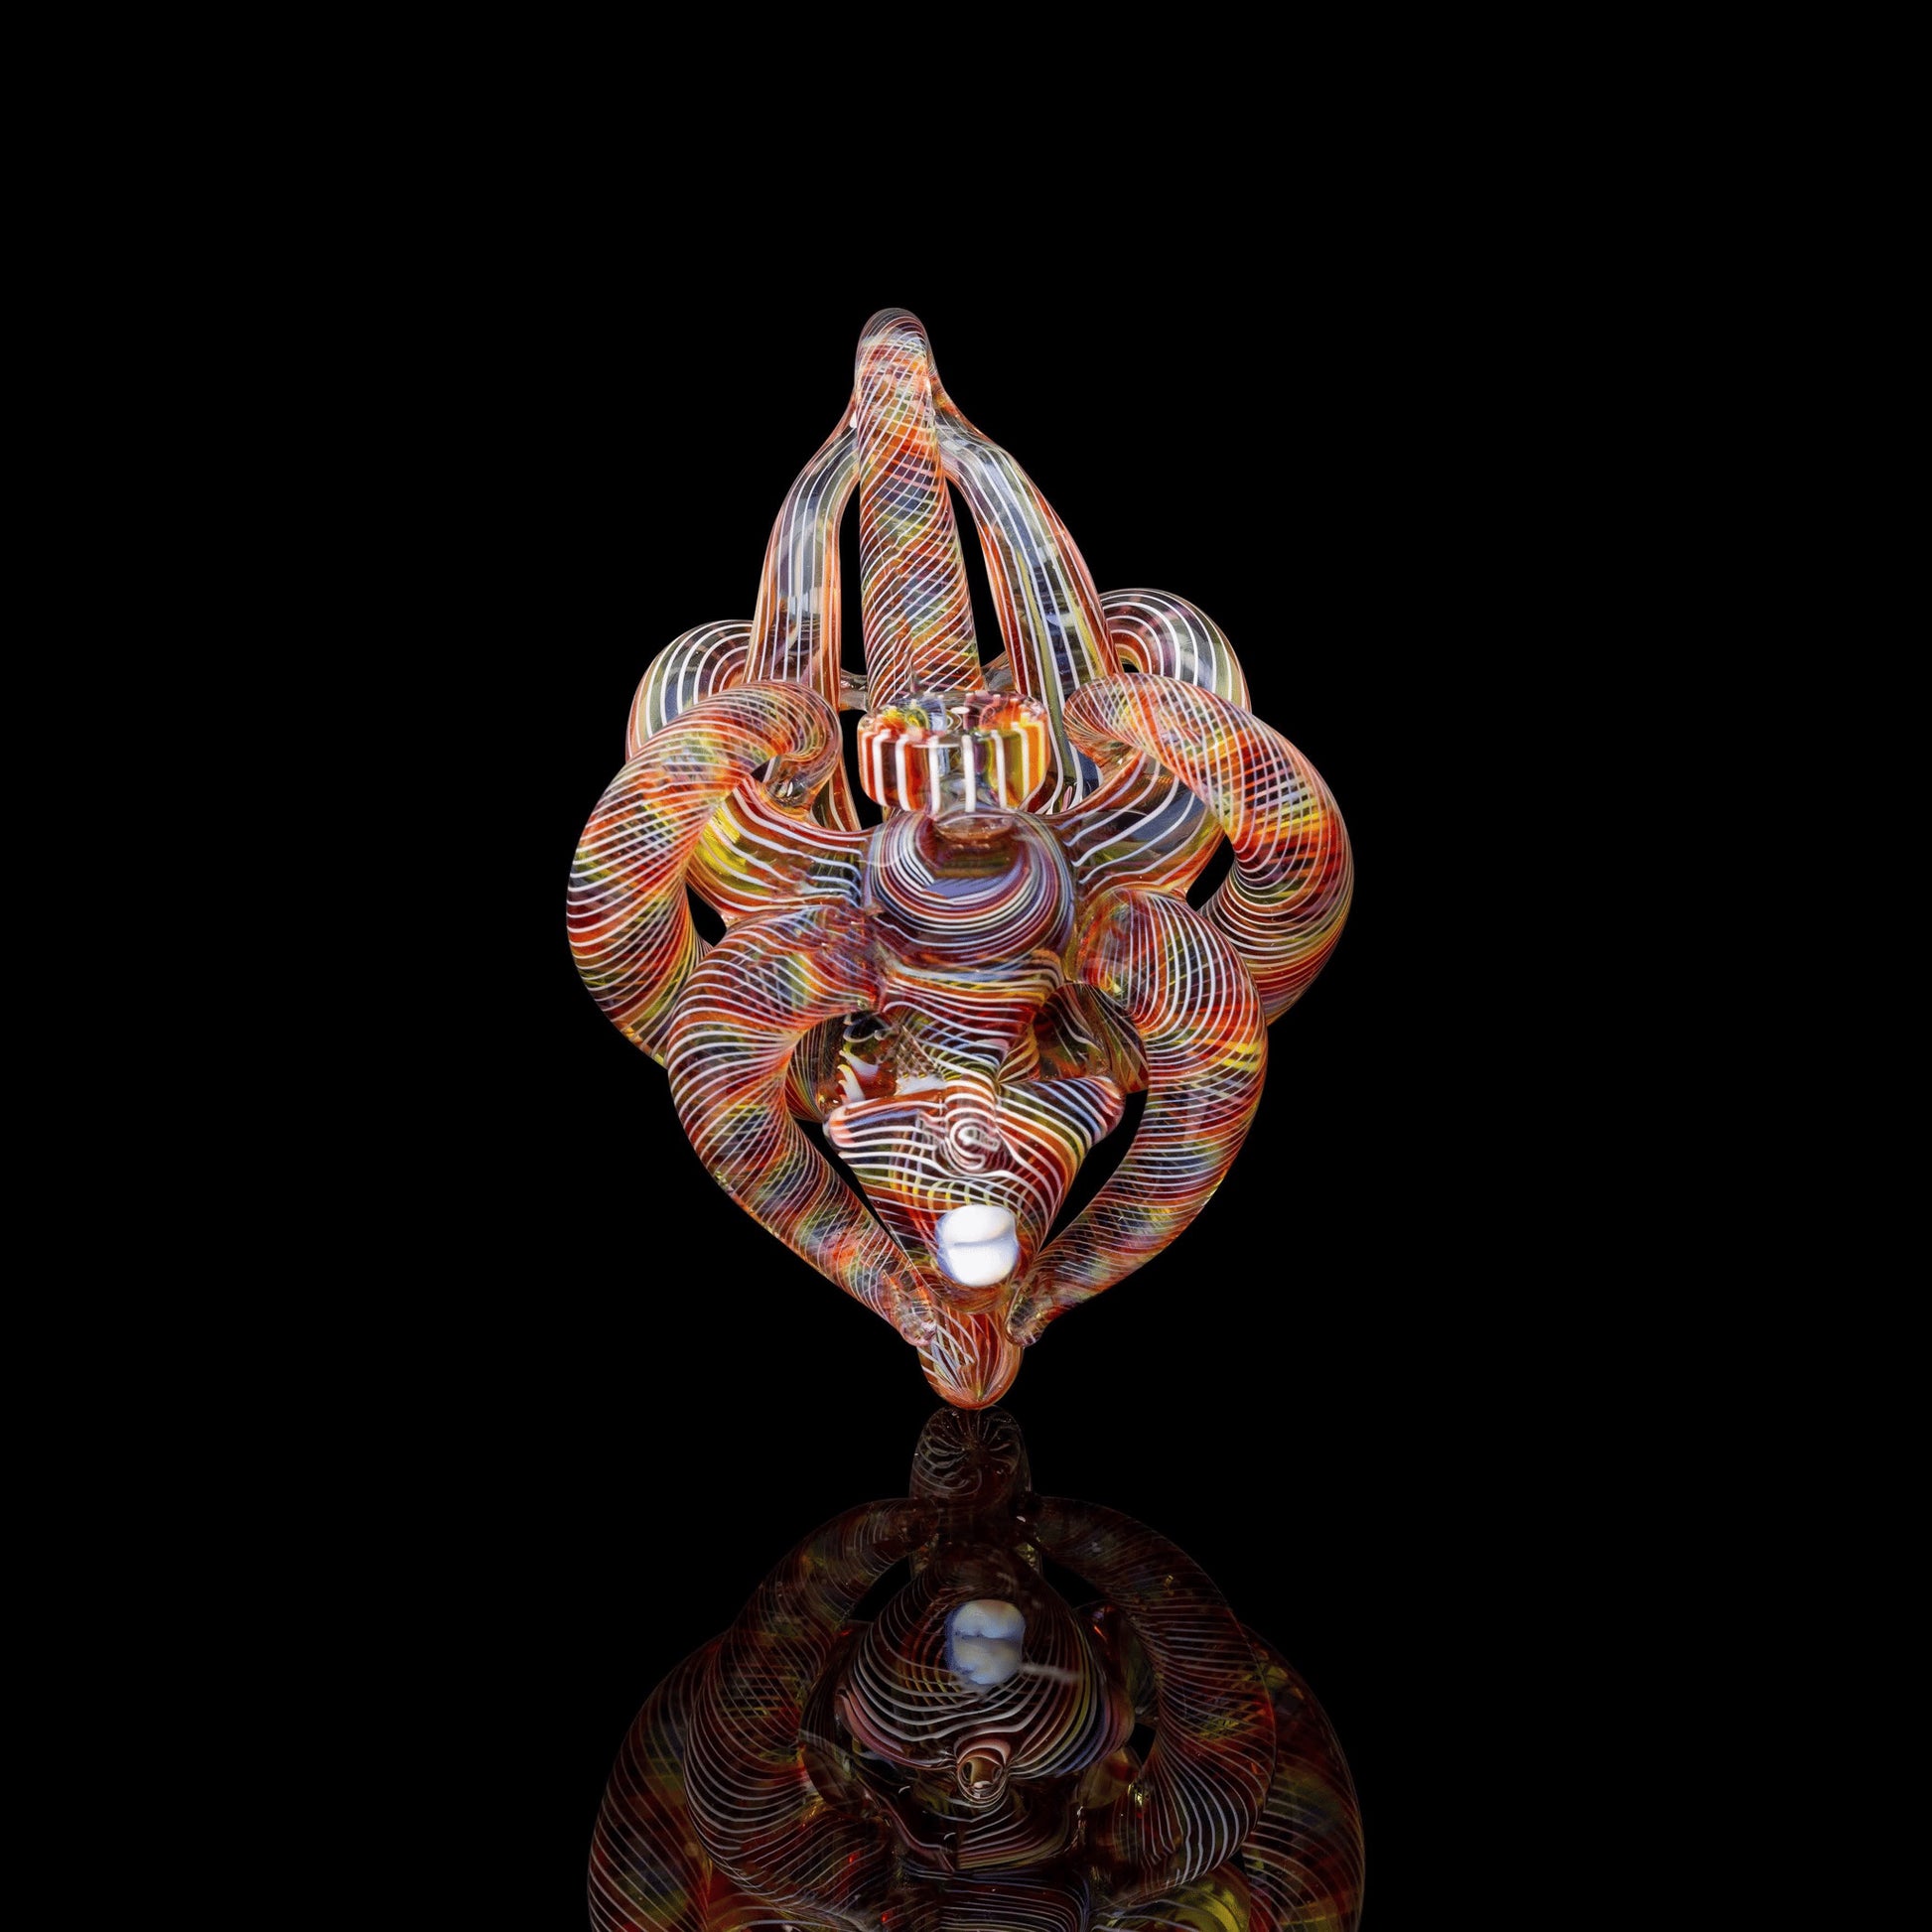 artisan-crafted glass pendant - Collab Goddess Pendant by LaceFace x Karma Glass (Rainbow Equinox 2022)